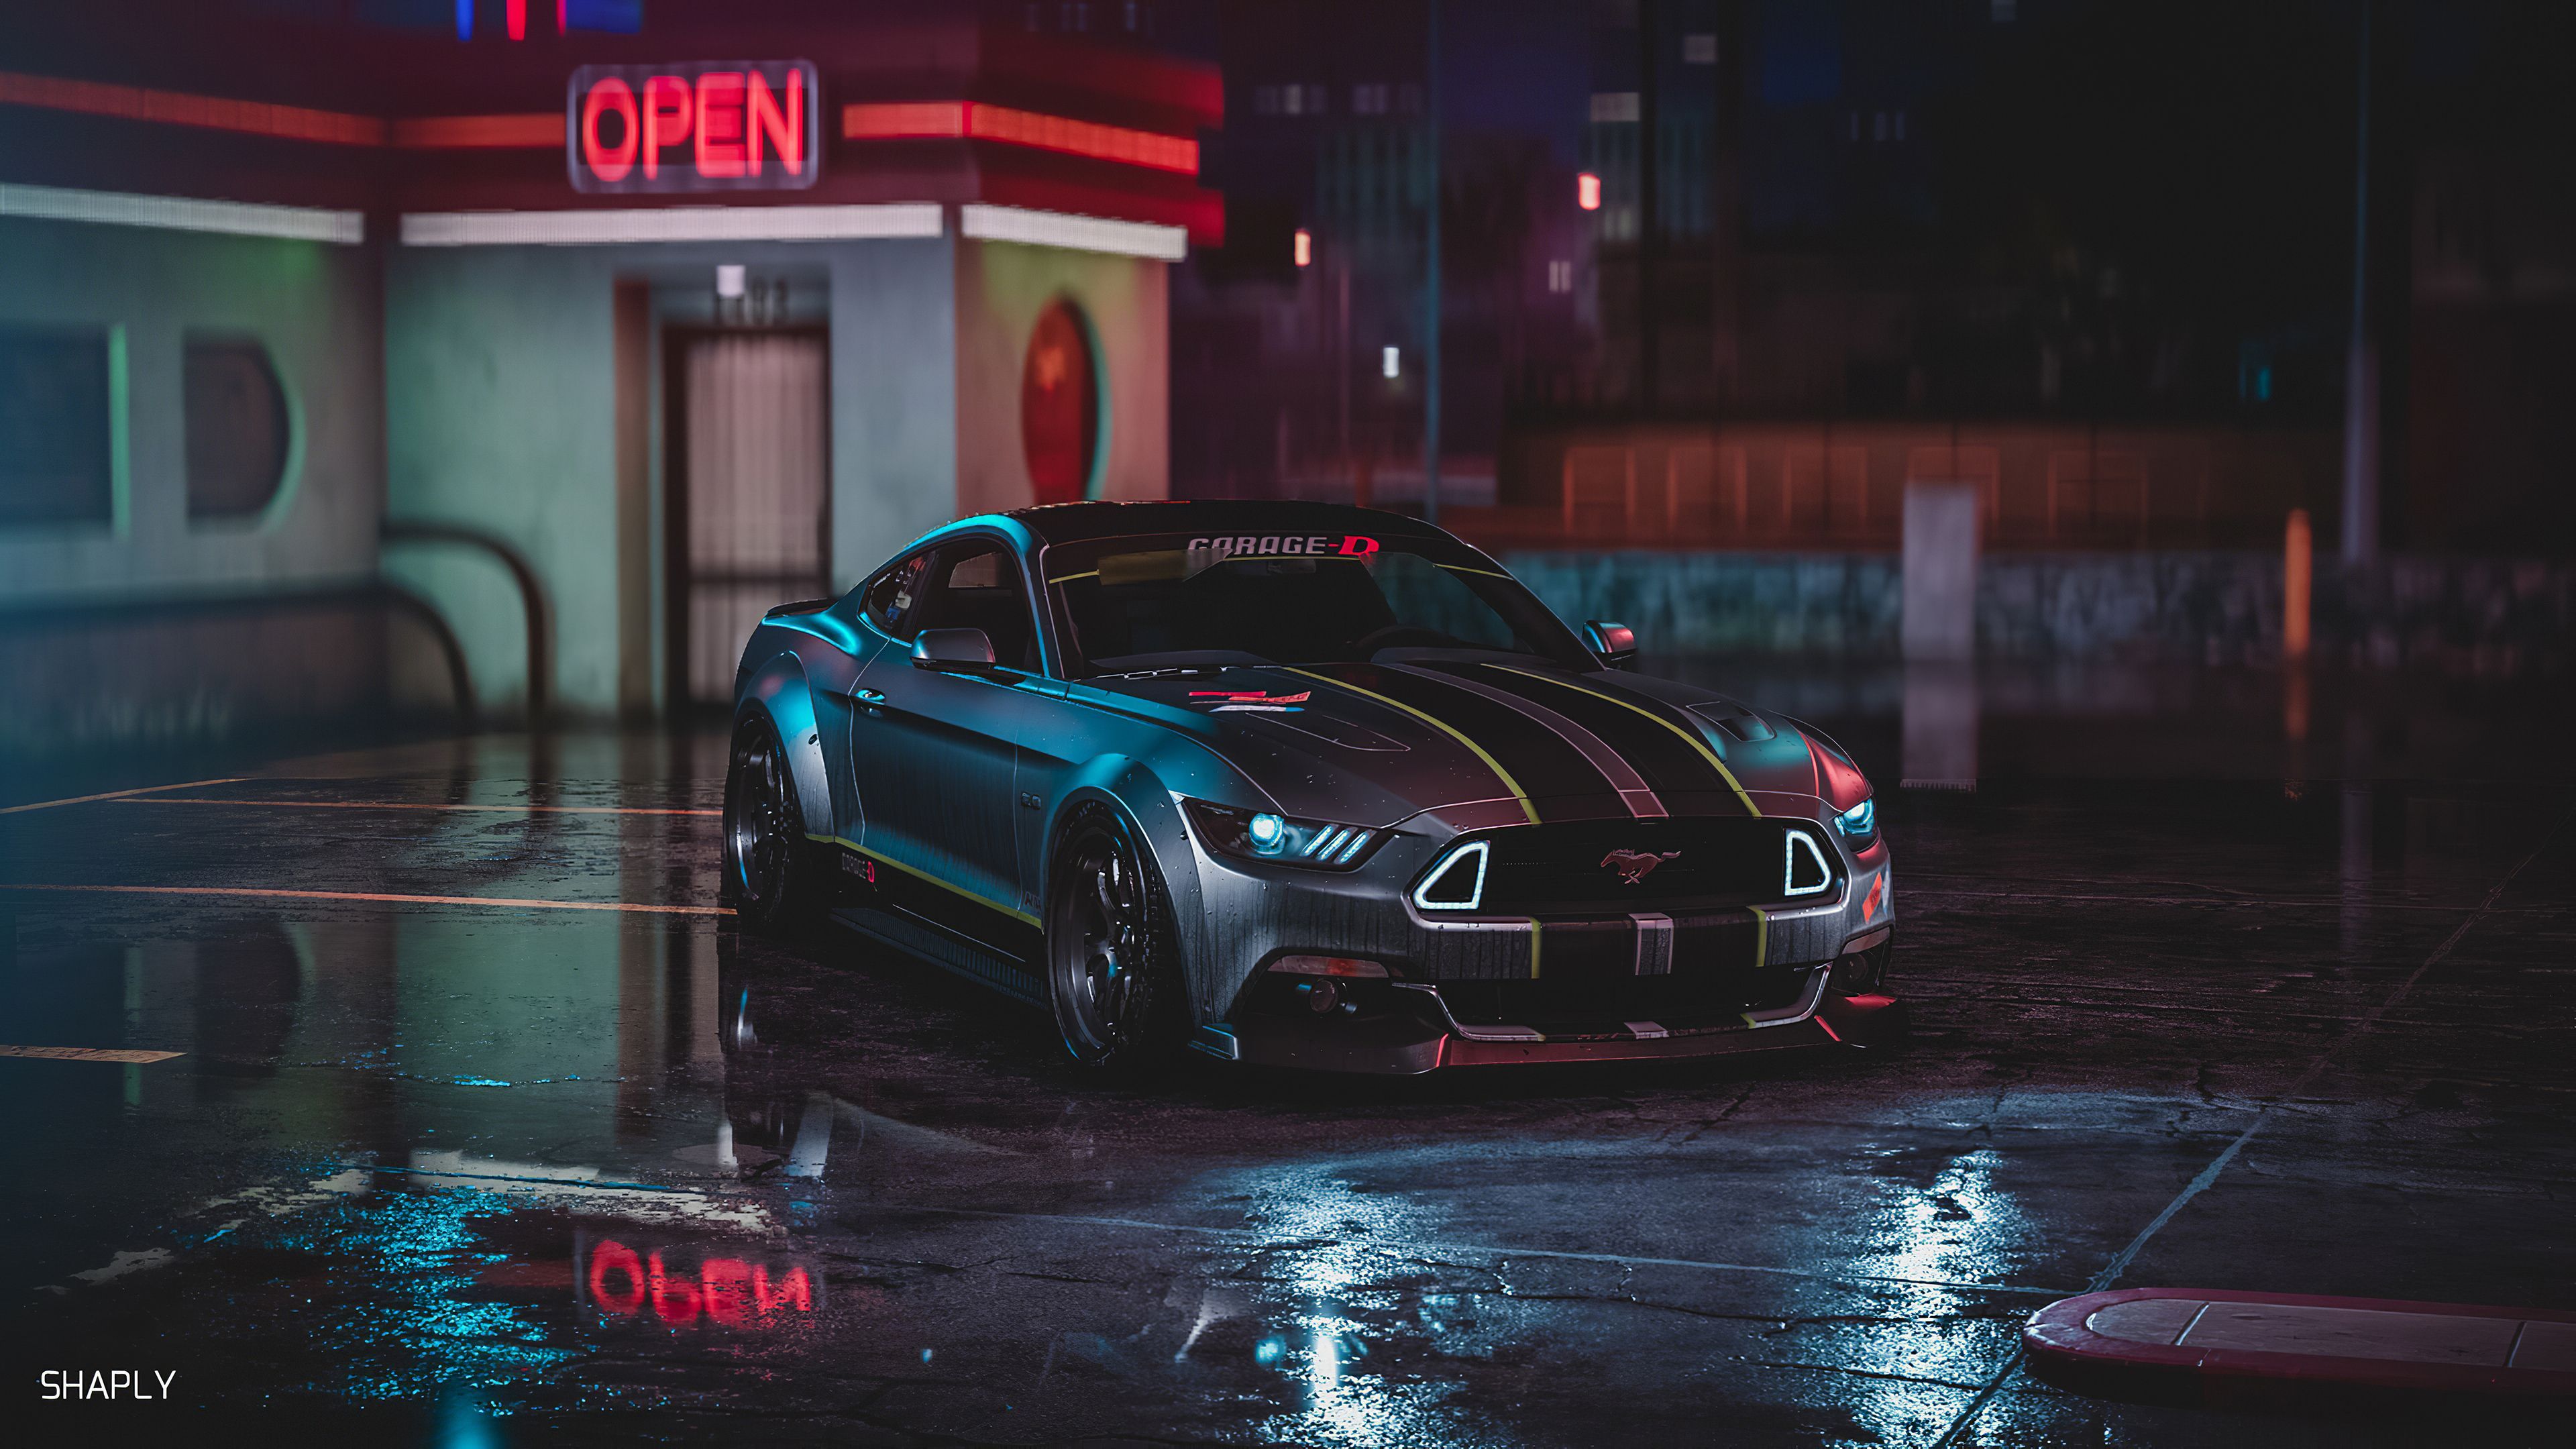 Ford Mustang Gt Neon Harmony Hd Wallpaper, Ford Wallpaper, Ford Mustang Wallpaper, Cars Wallpaper, Artstatio. Mustang Gt, Ford Mustang, Ford Mustang Wallpaper